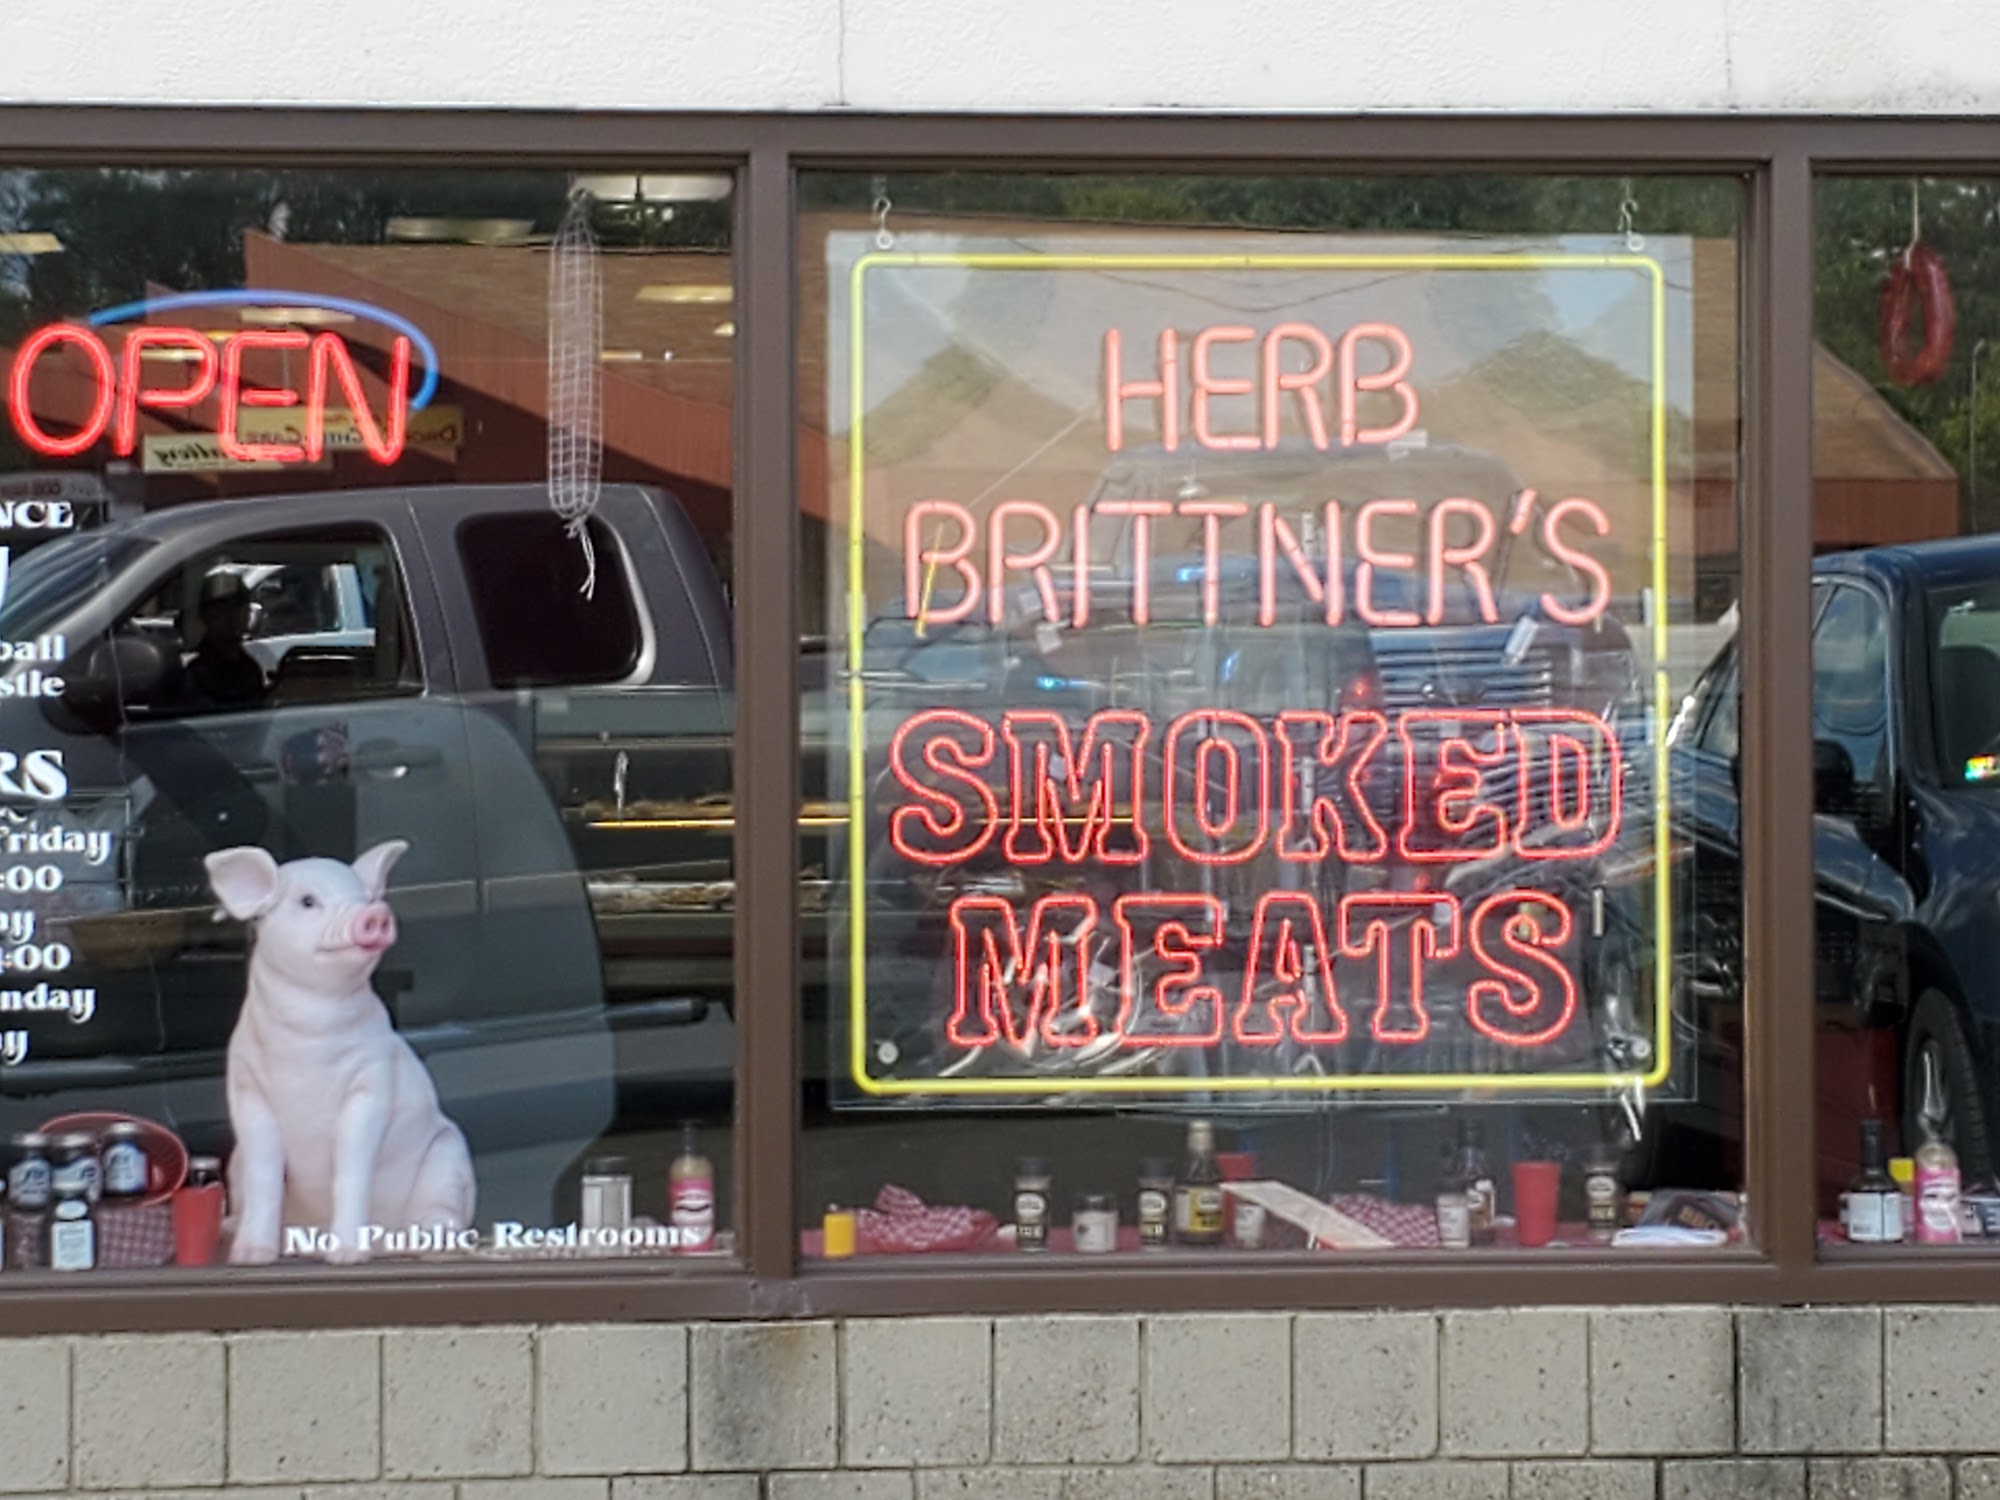 Herb Brittner's Smoked Meats